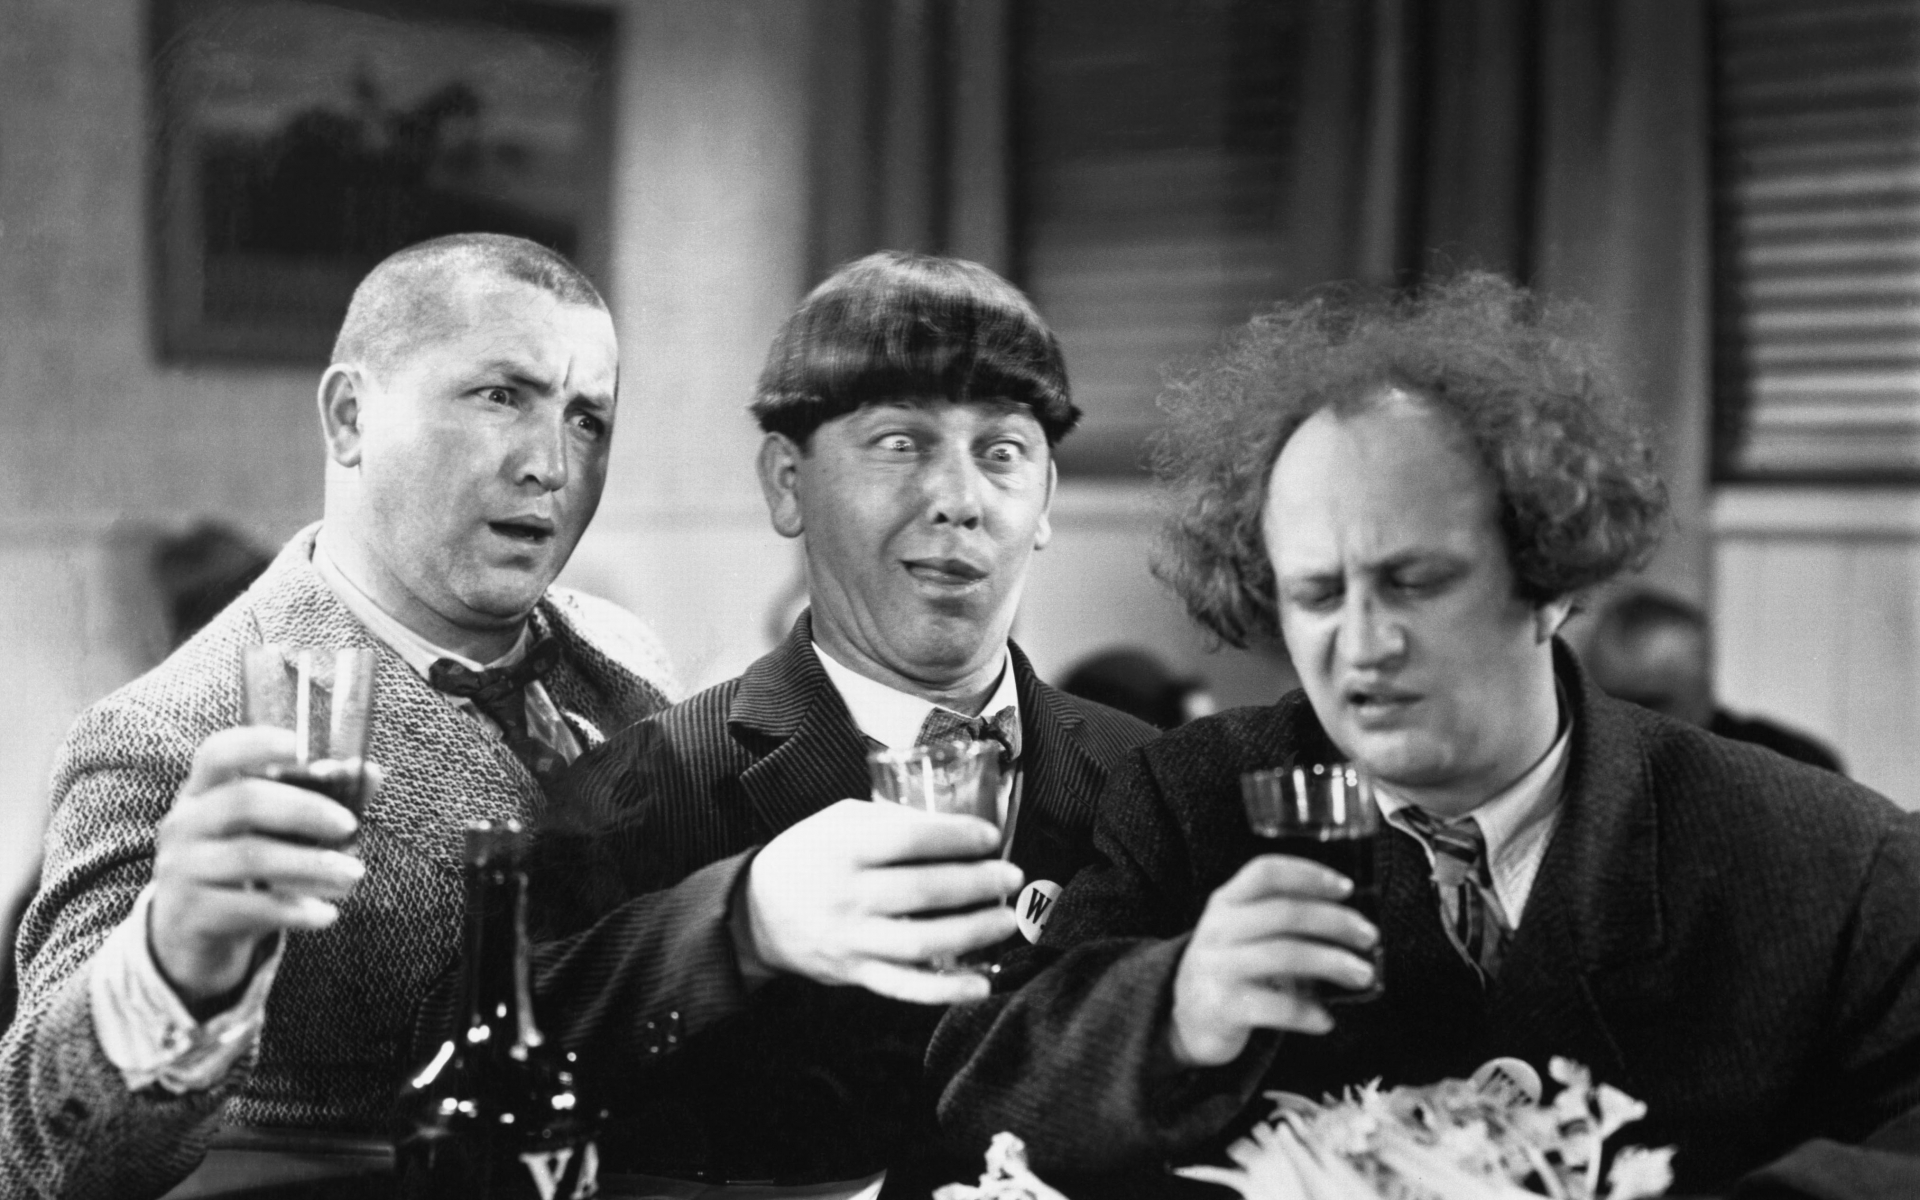 grayscale, Monochrome, Three, Stooges, Humor Wallpaper